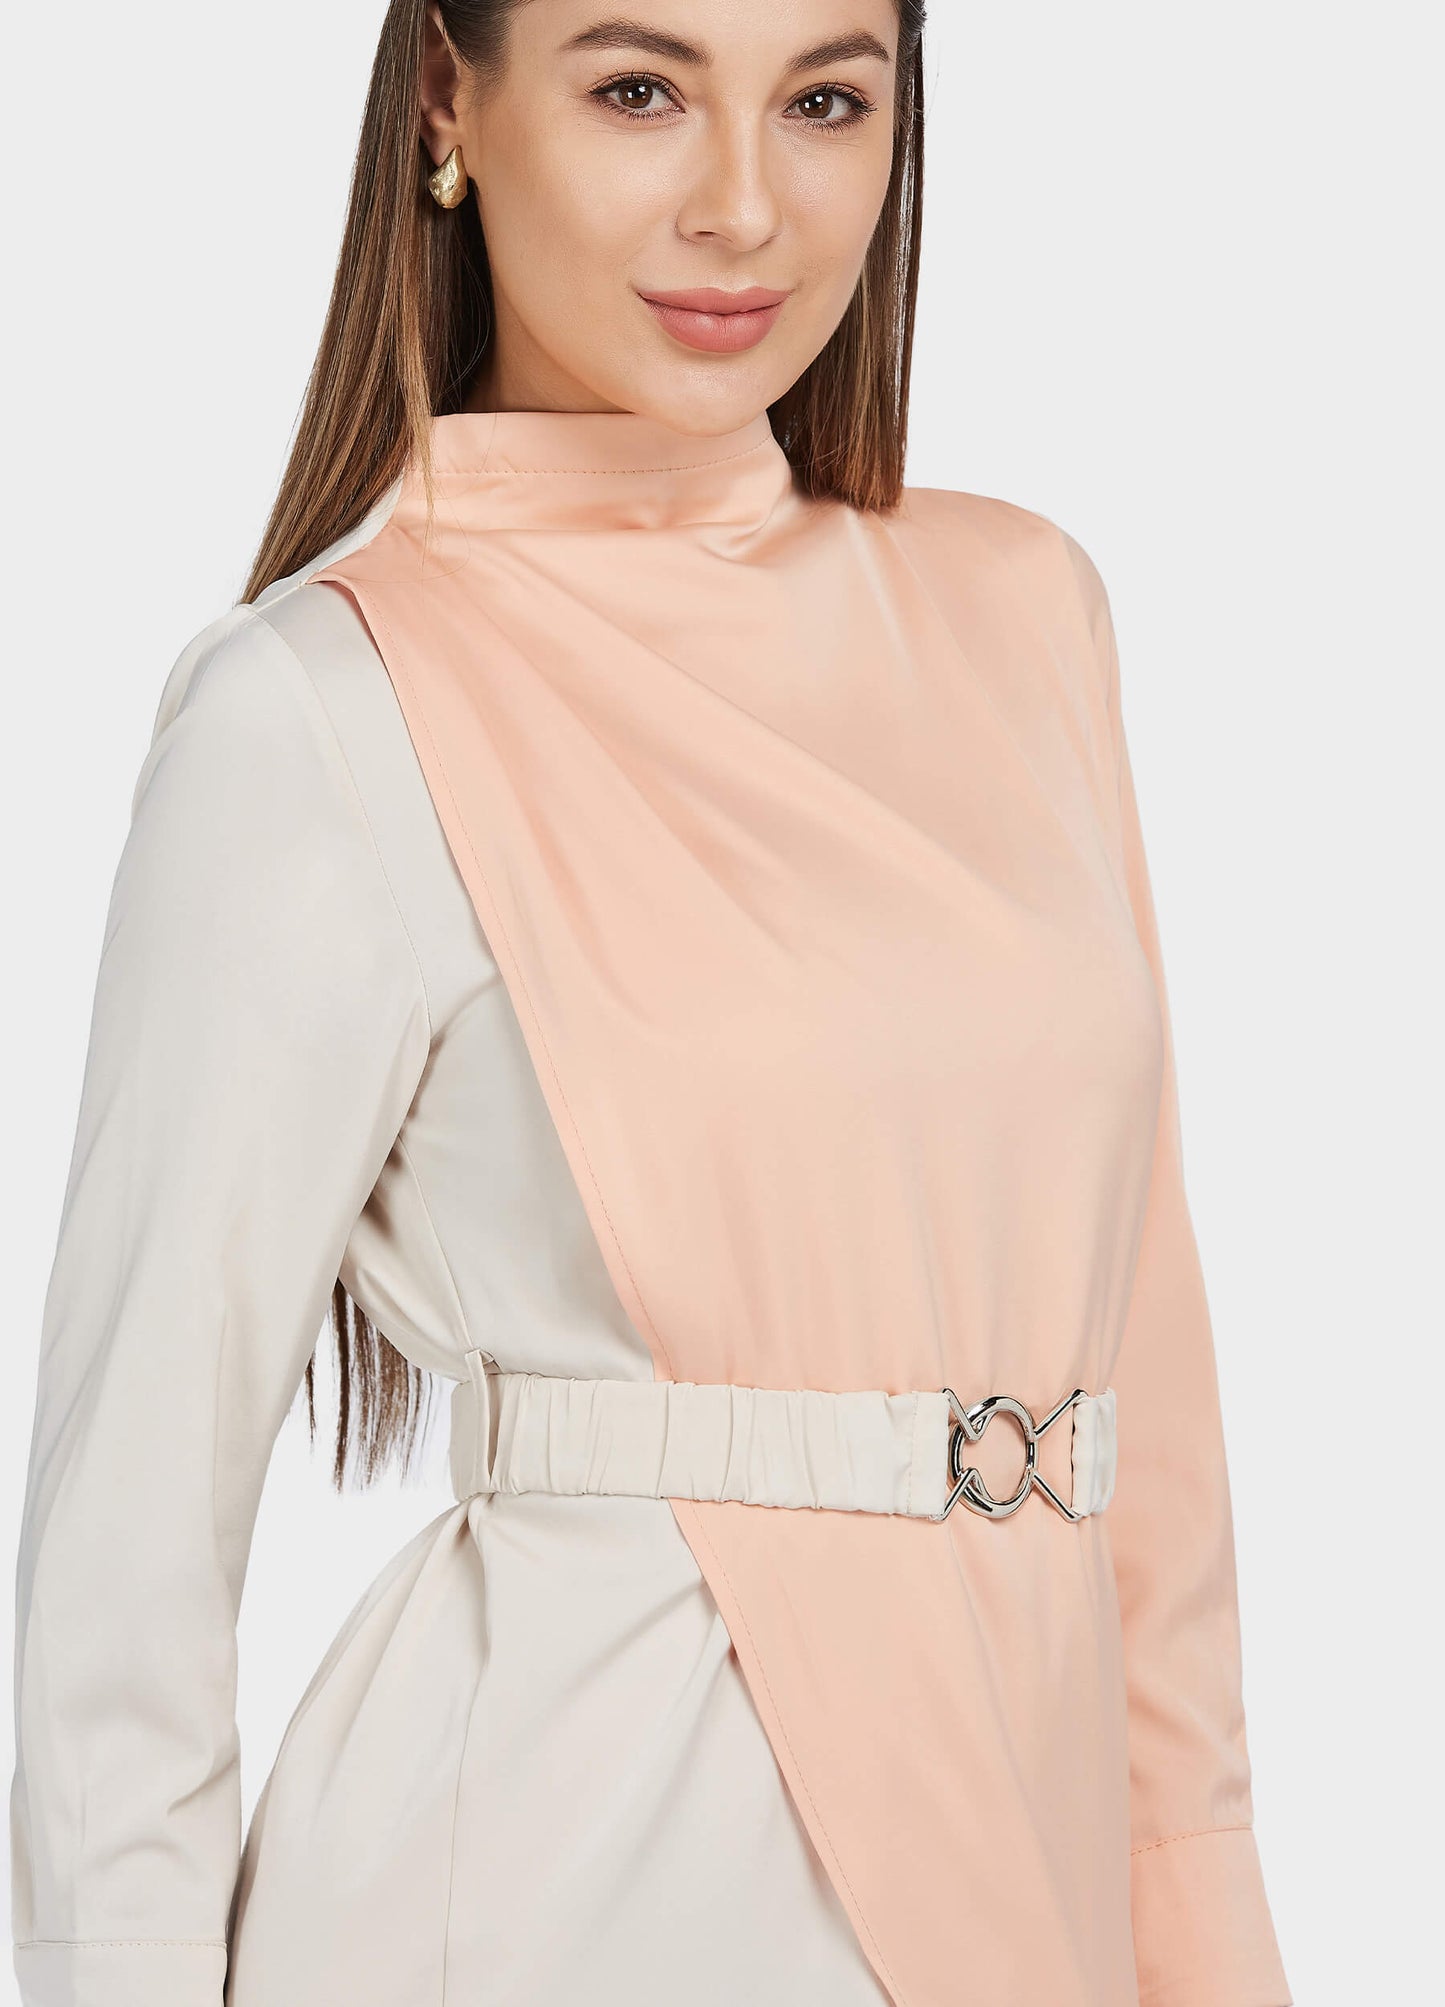 Women's Belted Colorblock High-Neck Long Sleeve Dress-Apricot&Pink